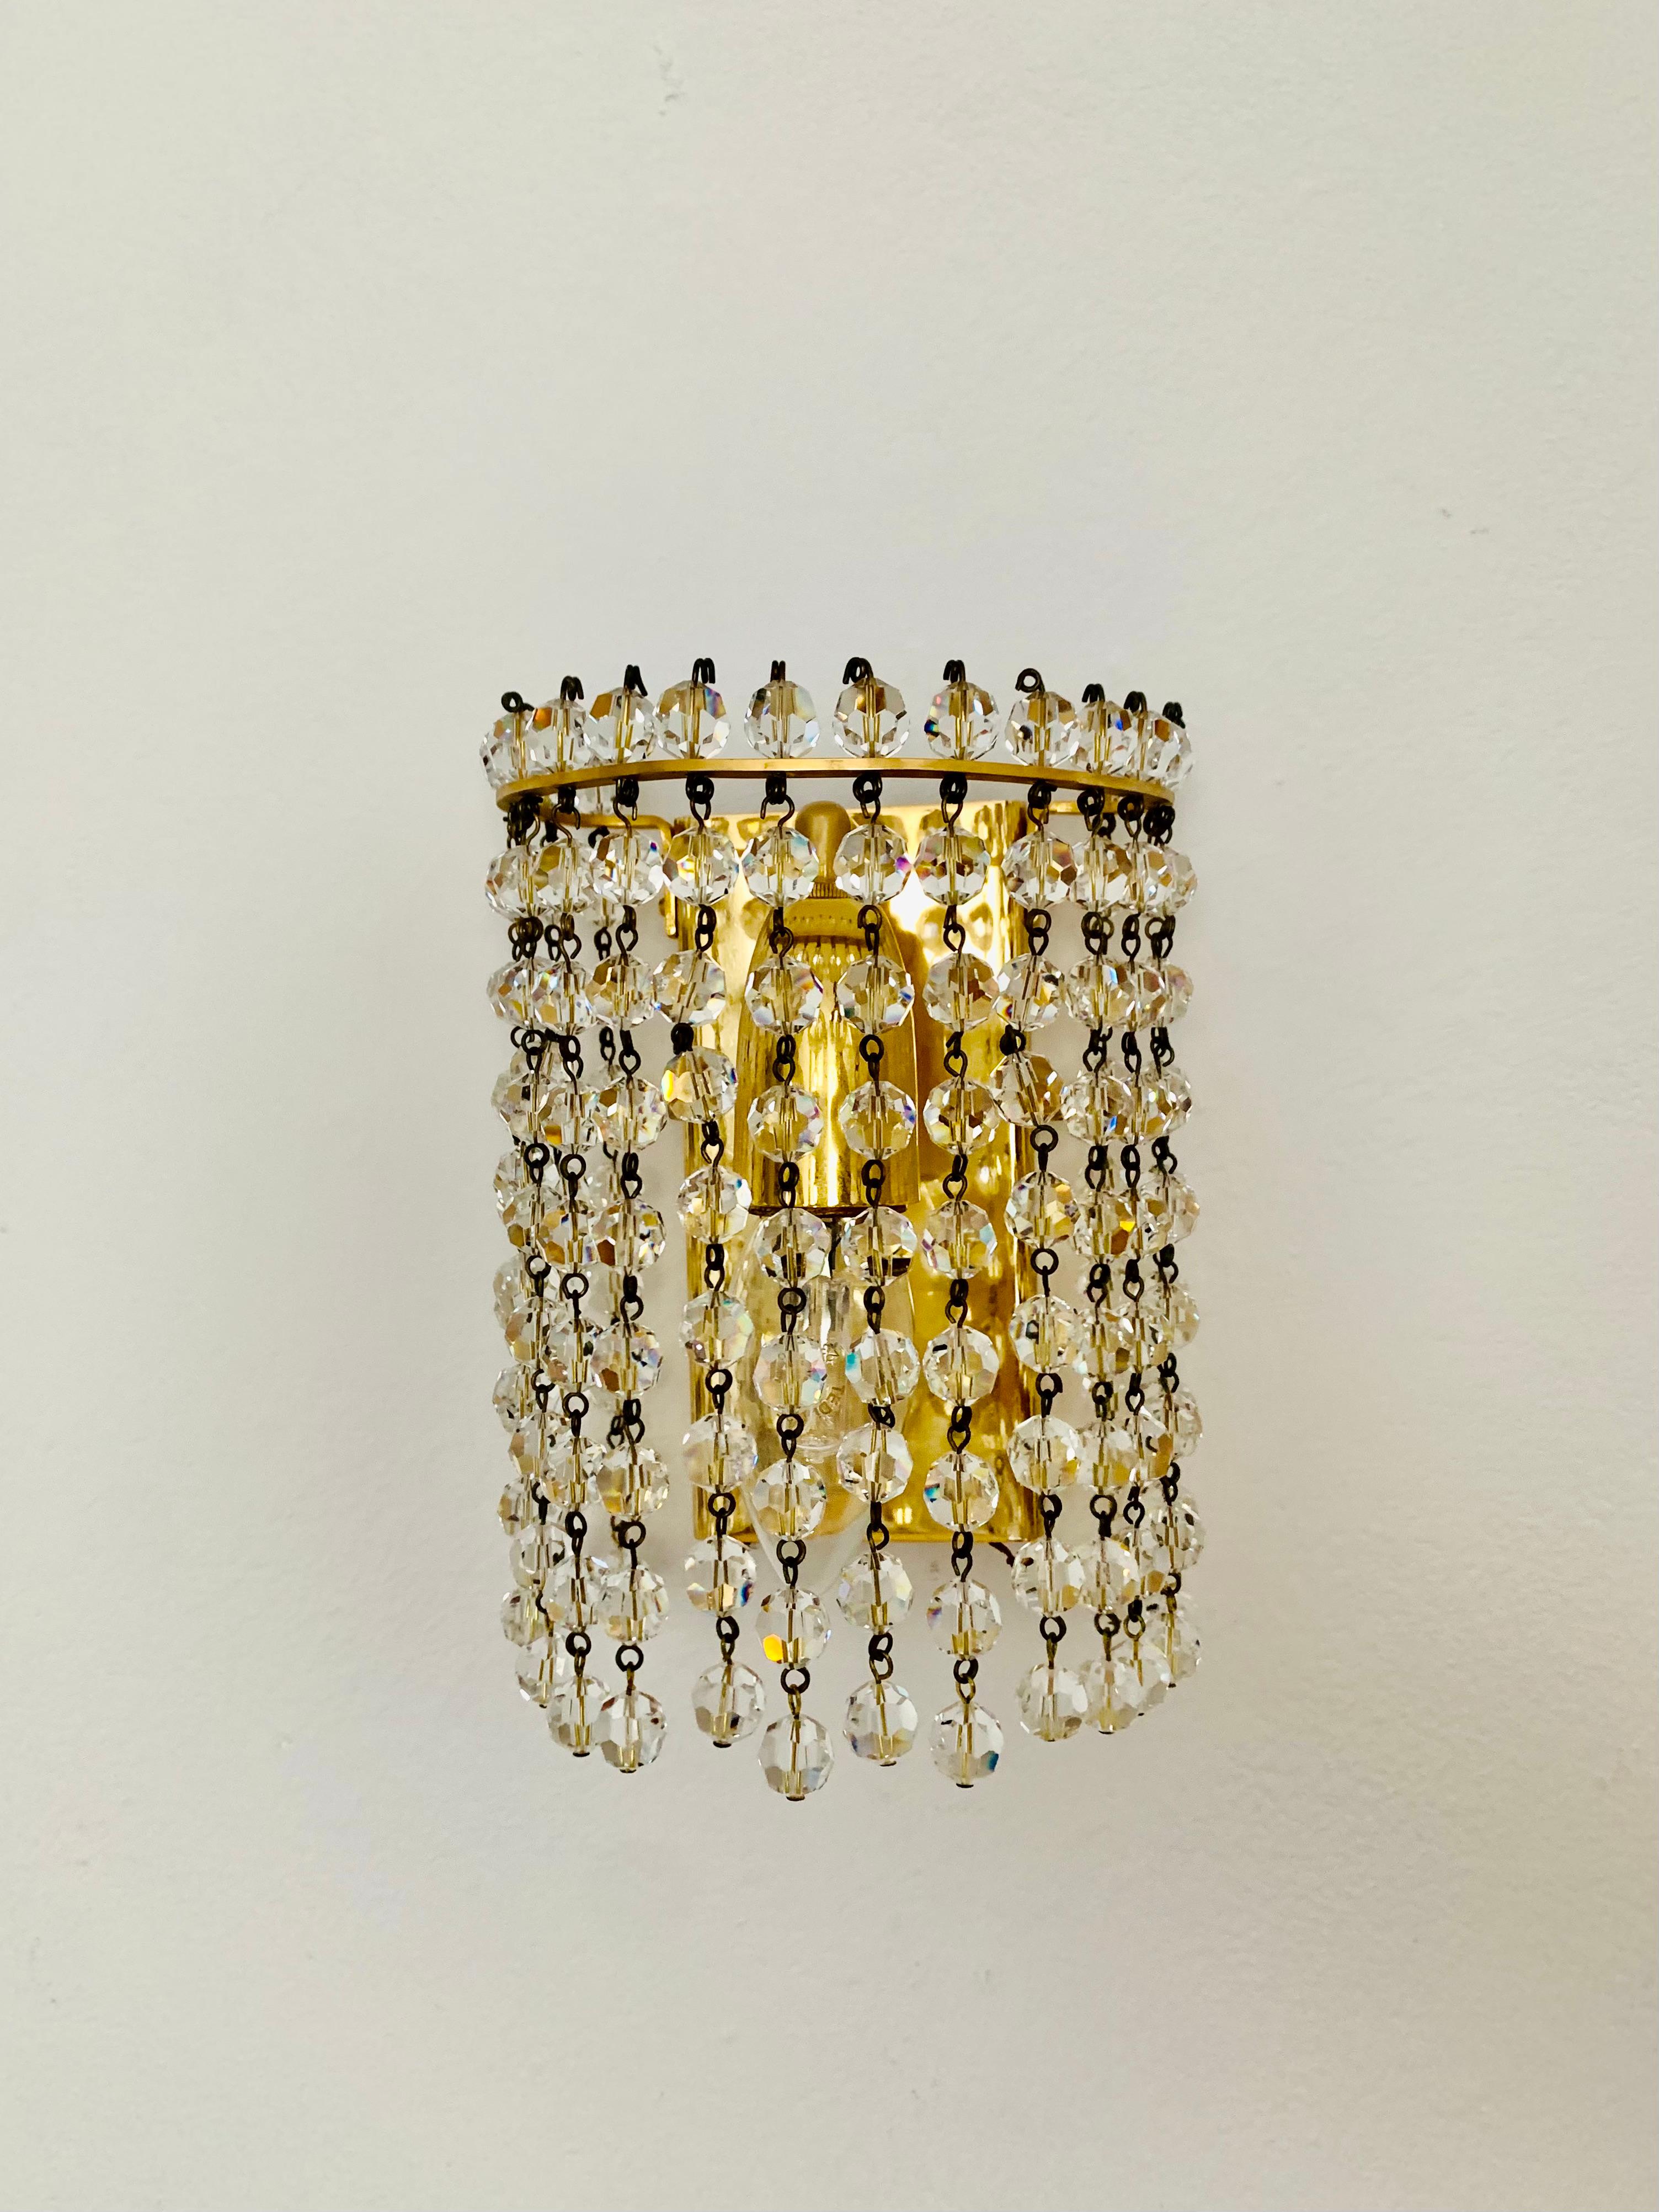 Very beautiful and rare wall lamps from the 1960s.
Very pleasant lighting effect due to the crystal glass, which spreads an elegant, sparkling play of light in the room.
Excitingly beautiful design and high-quality workmanship.

Manufacturer: